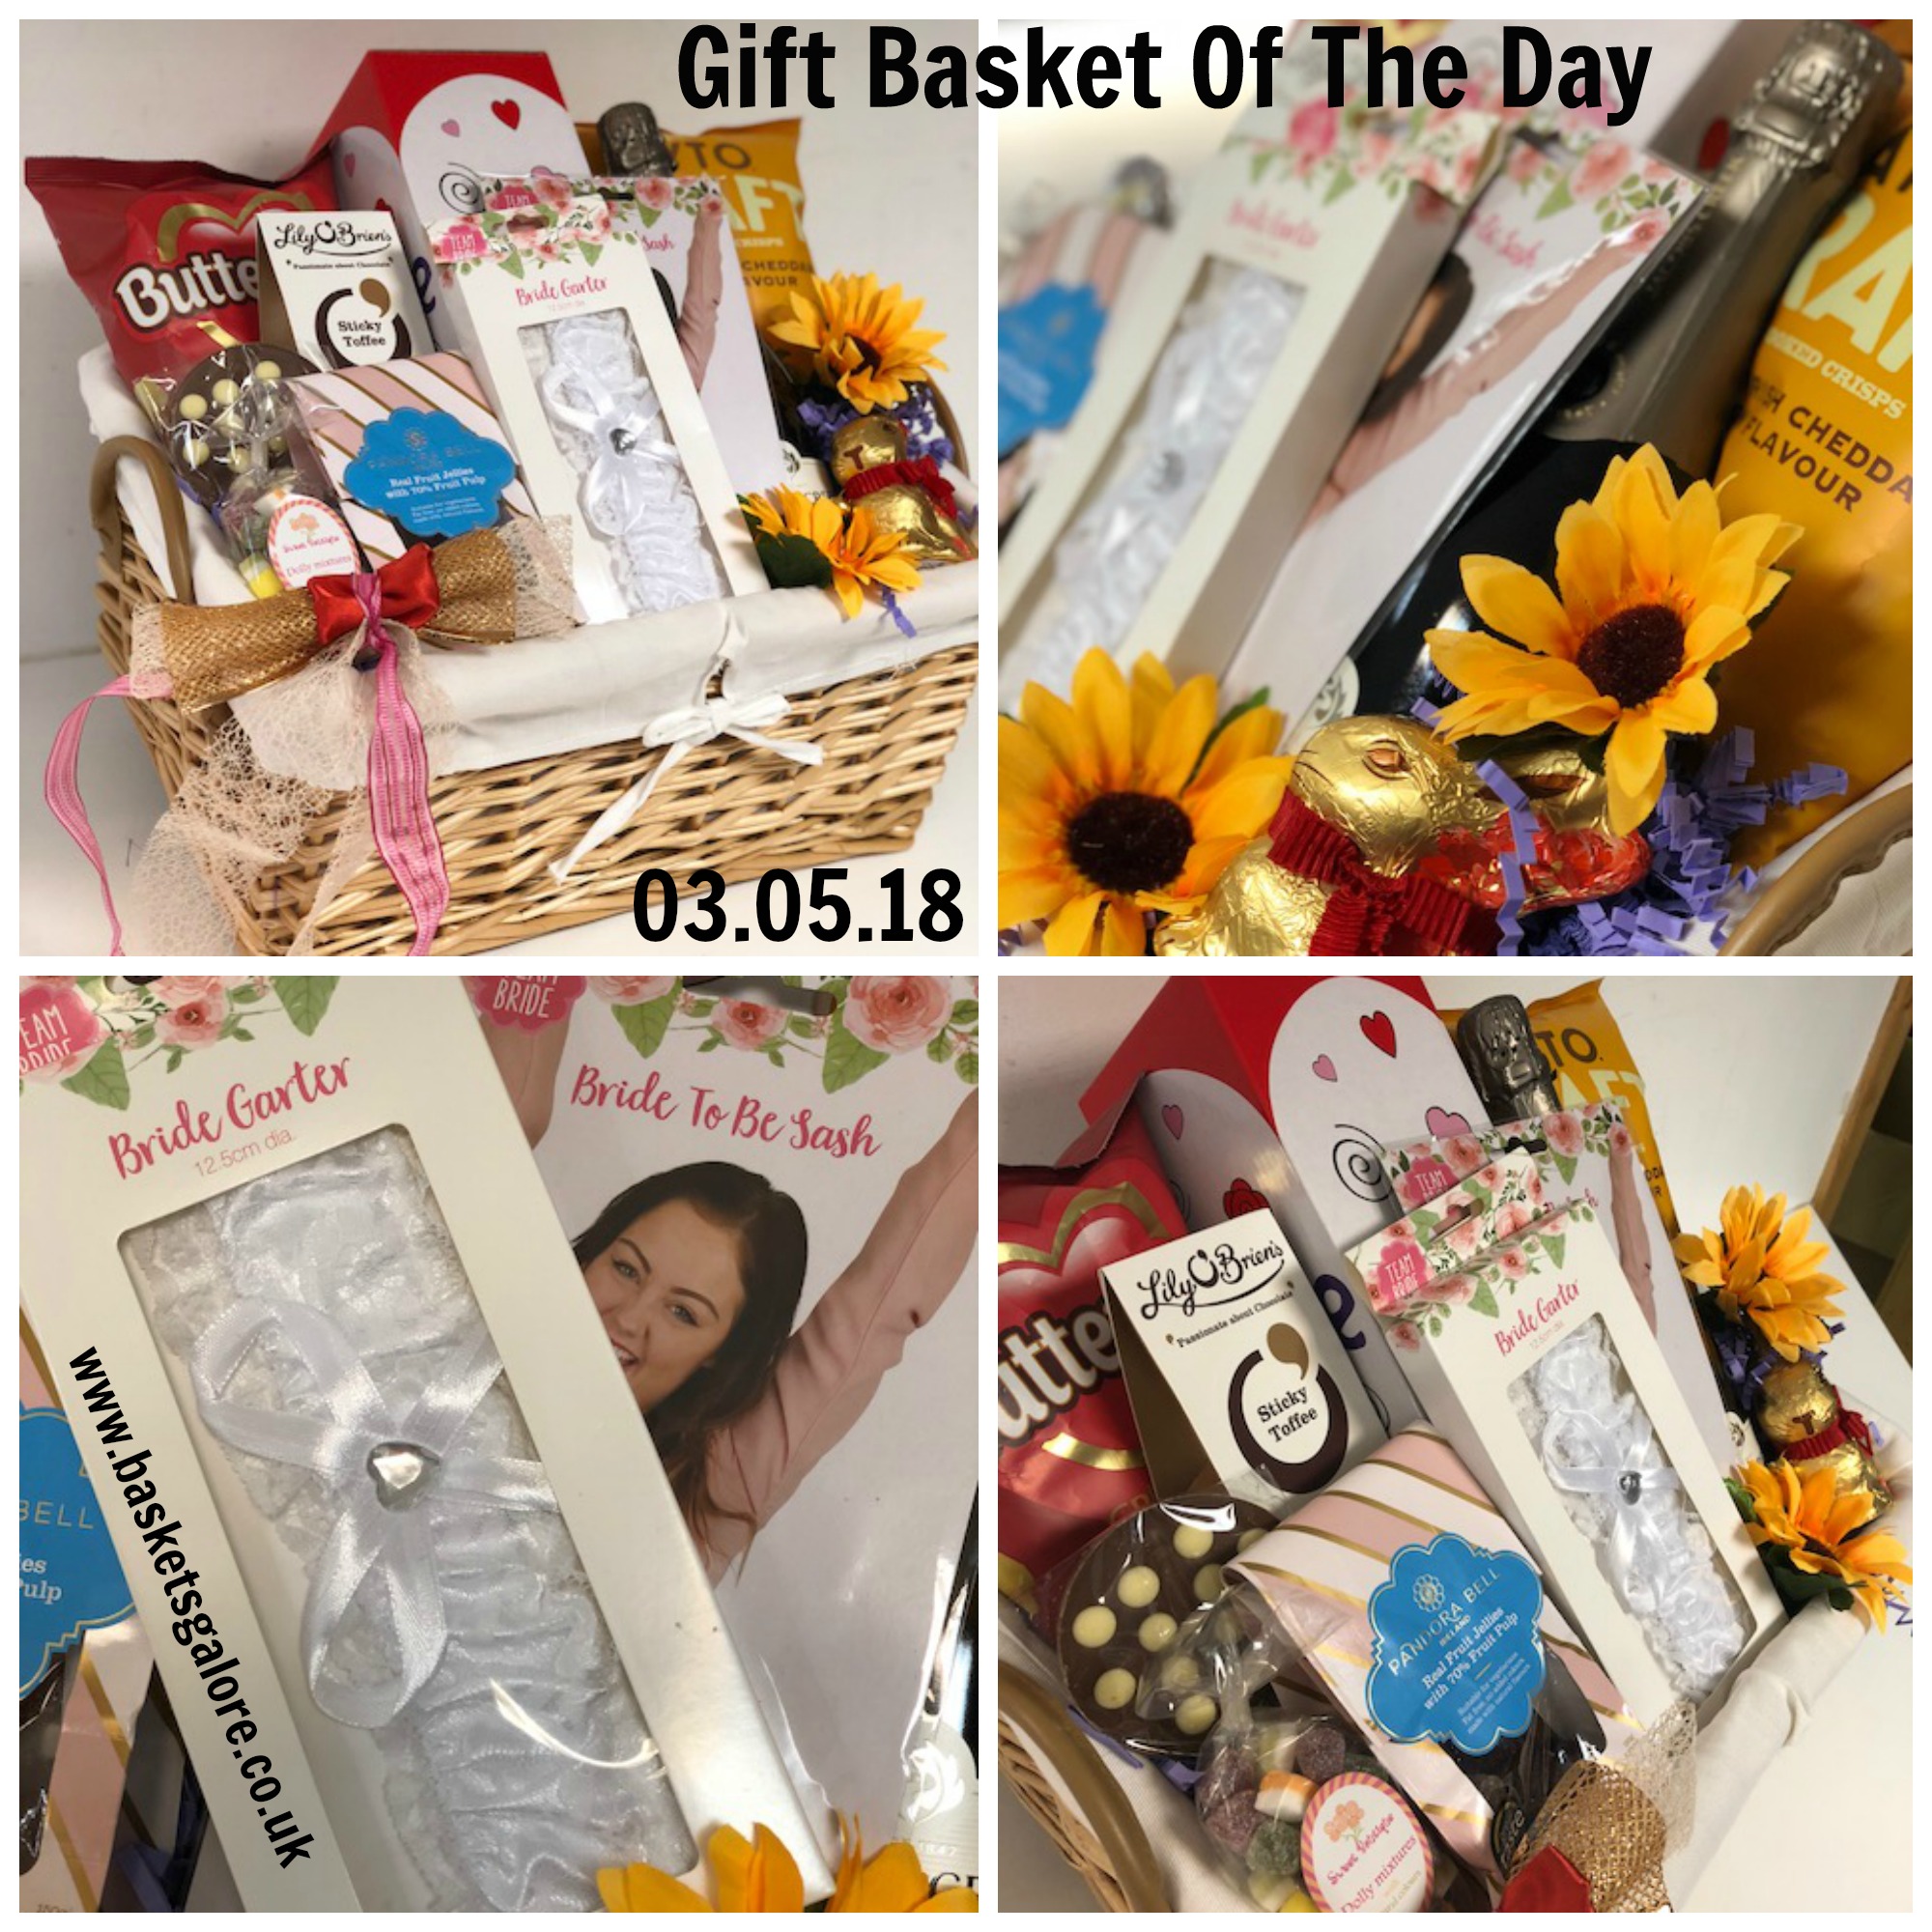 Baskets Galore’s Customer Gifts – Gift Basket of the Day 03.05.18